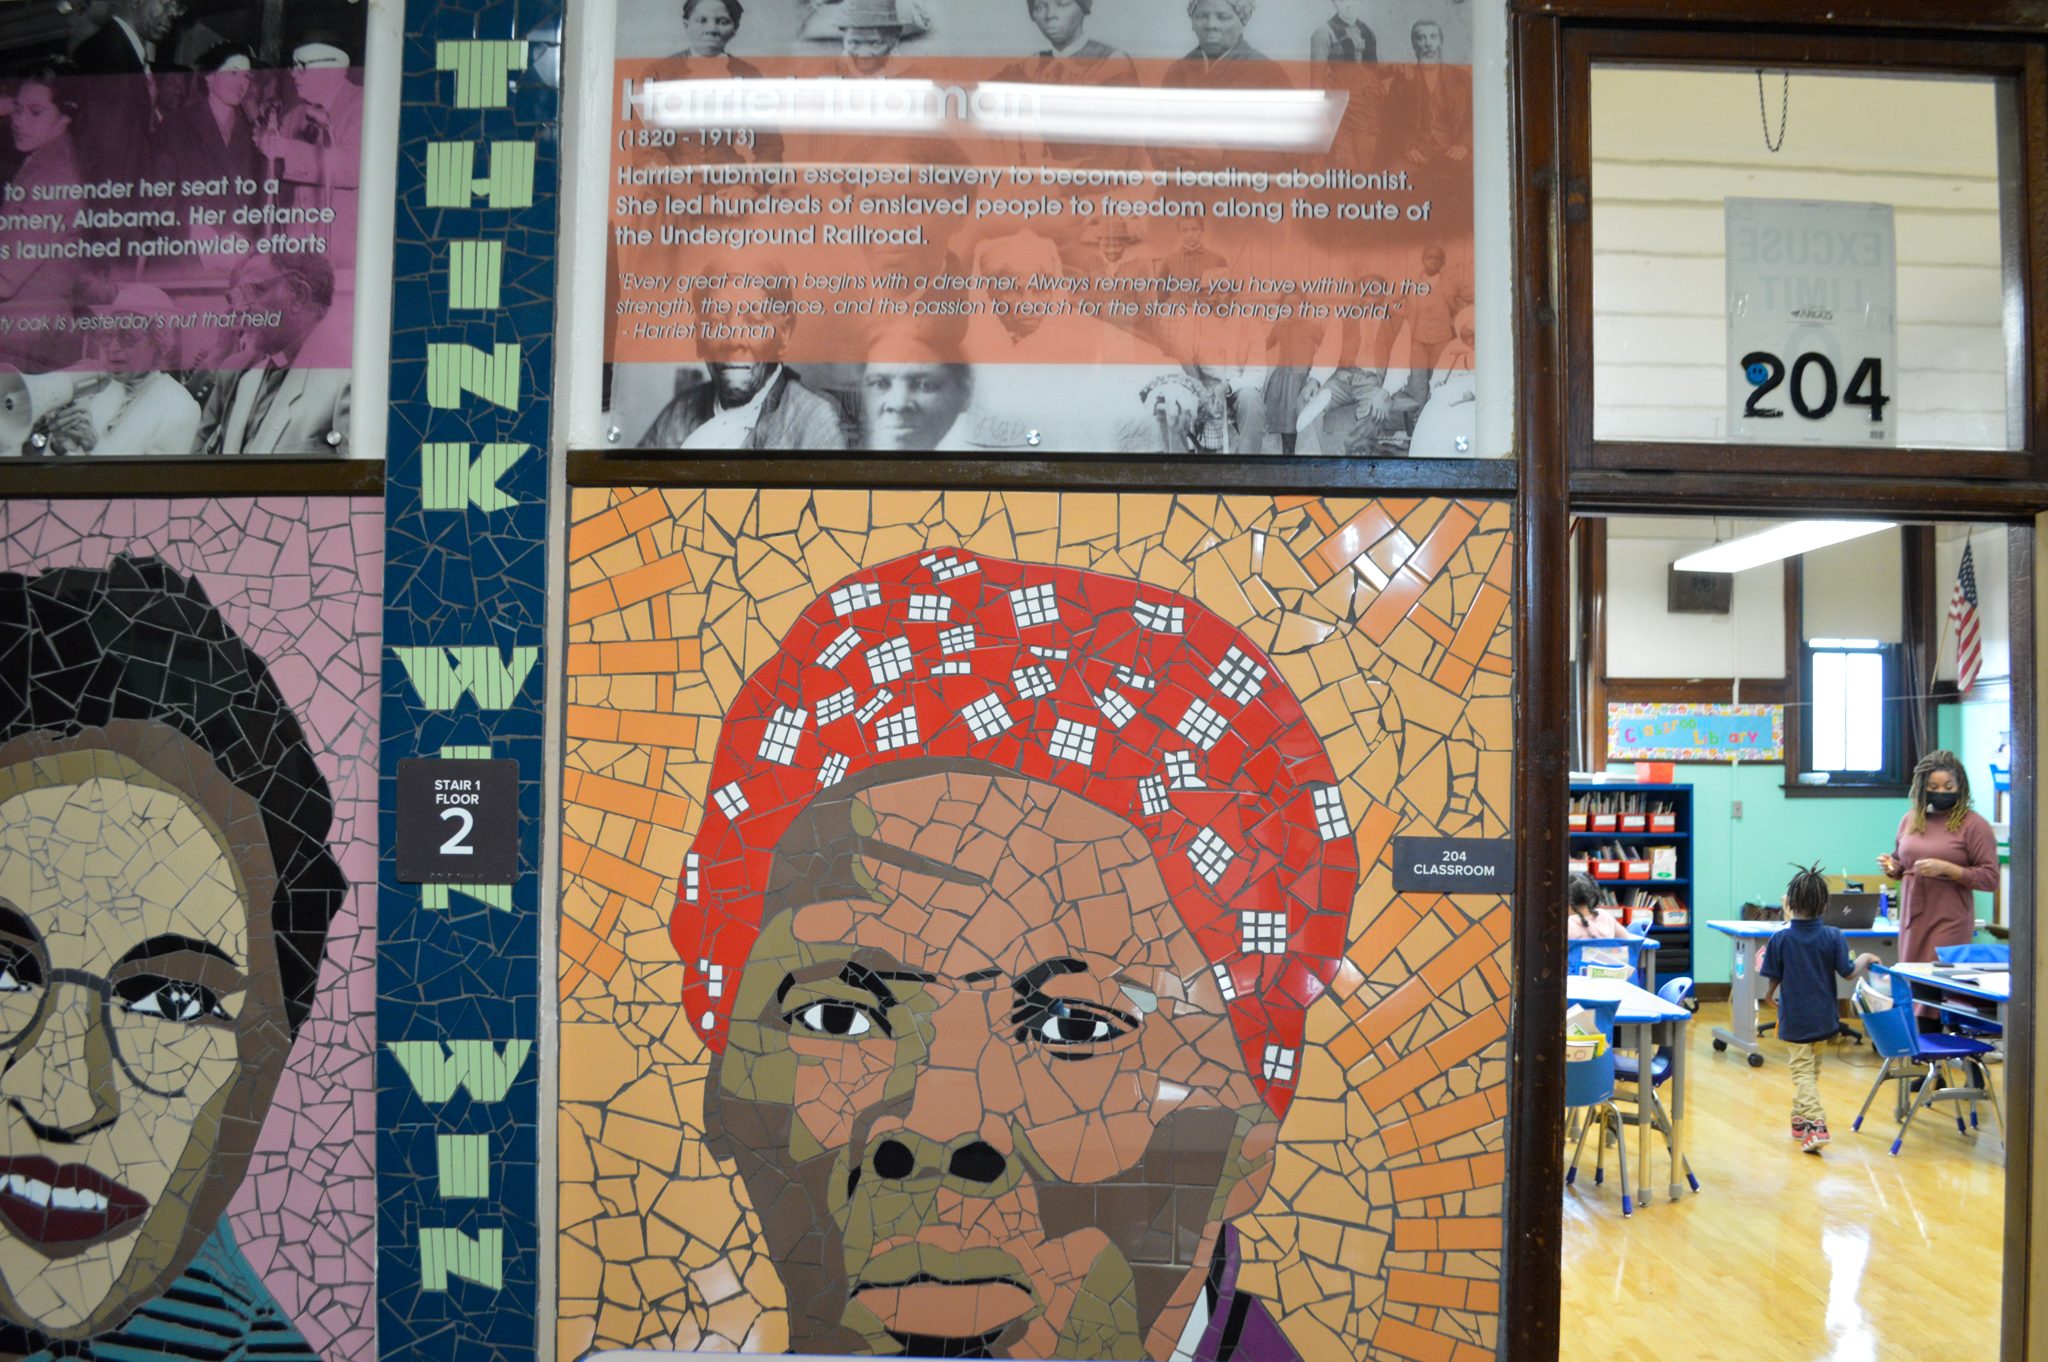 Imagery of black history month figures with the words "Think" and "Win"